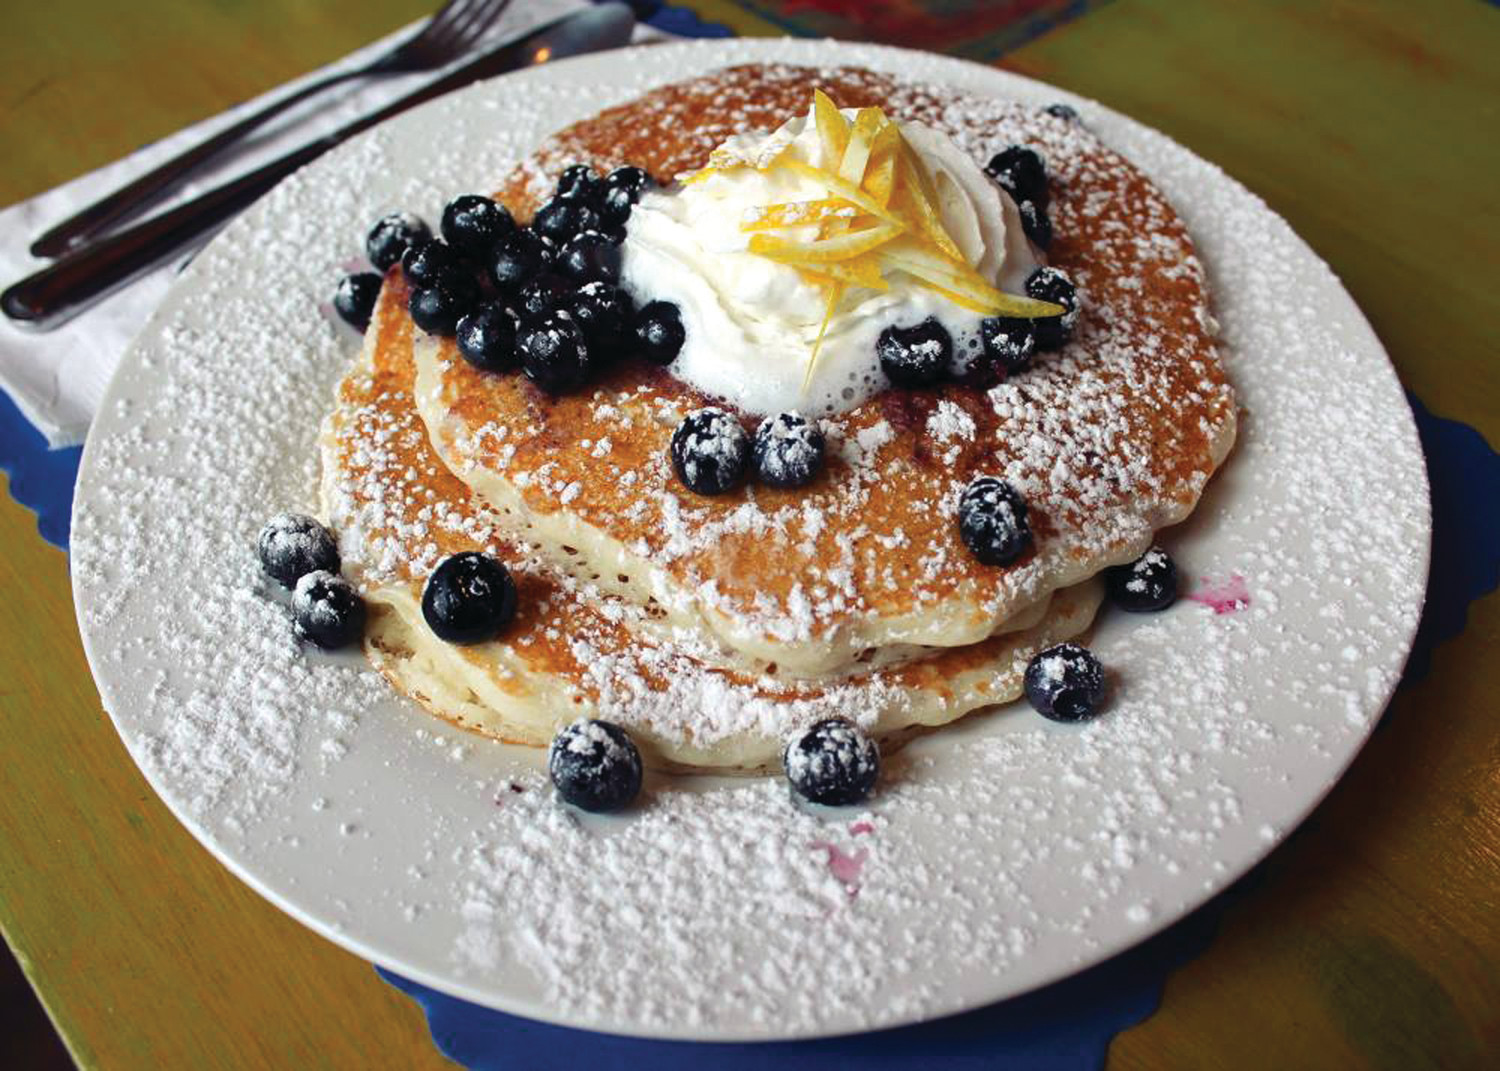 Come to Character’s Café on Rolfe Street for a stack of their fluffy blueberry pancakes, sprinkled with powdered sugar and drizzled with maple syrup ~ the perfect way to start any day!